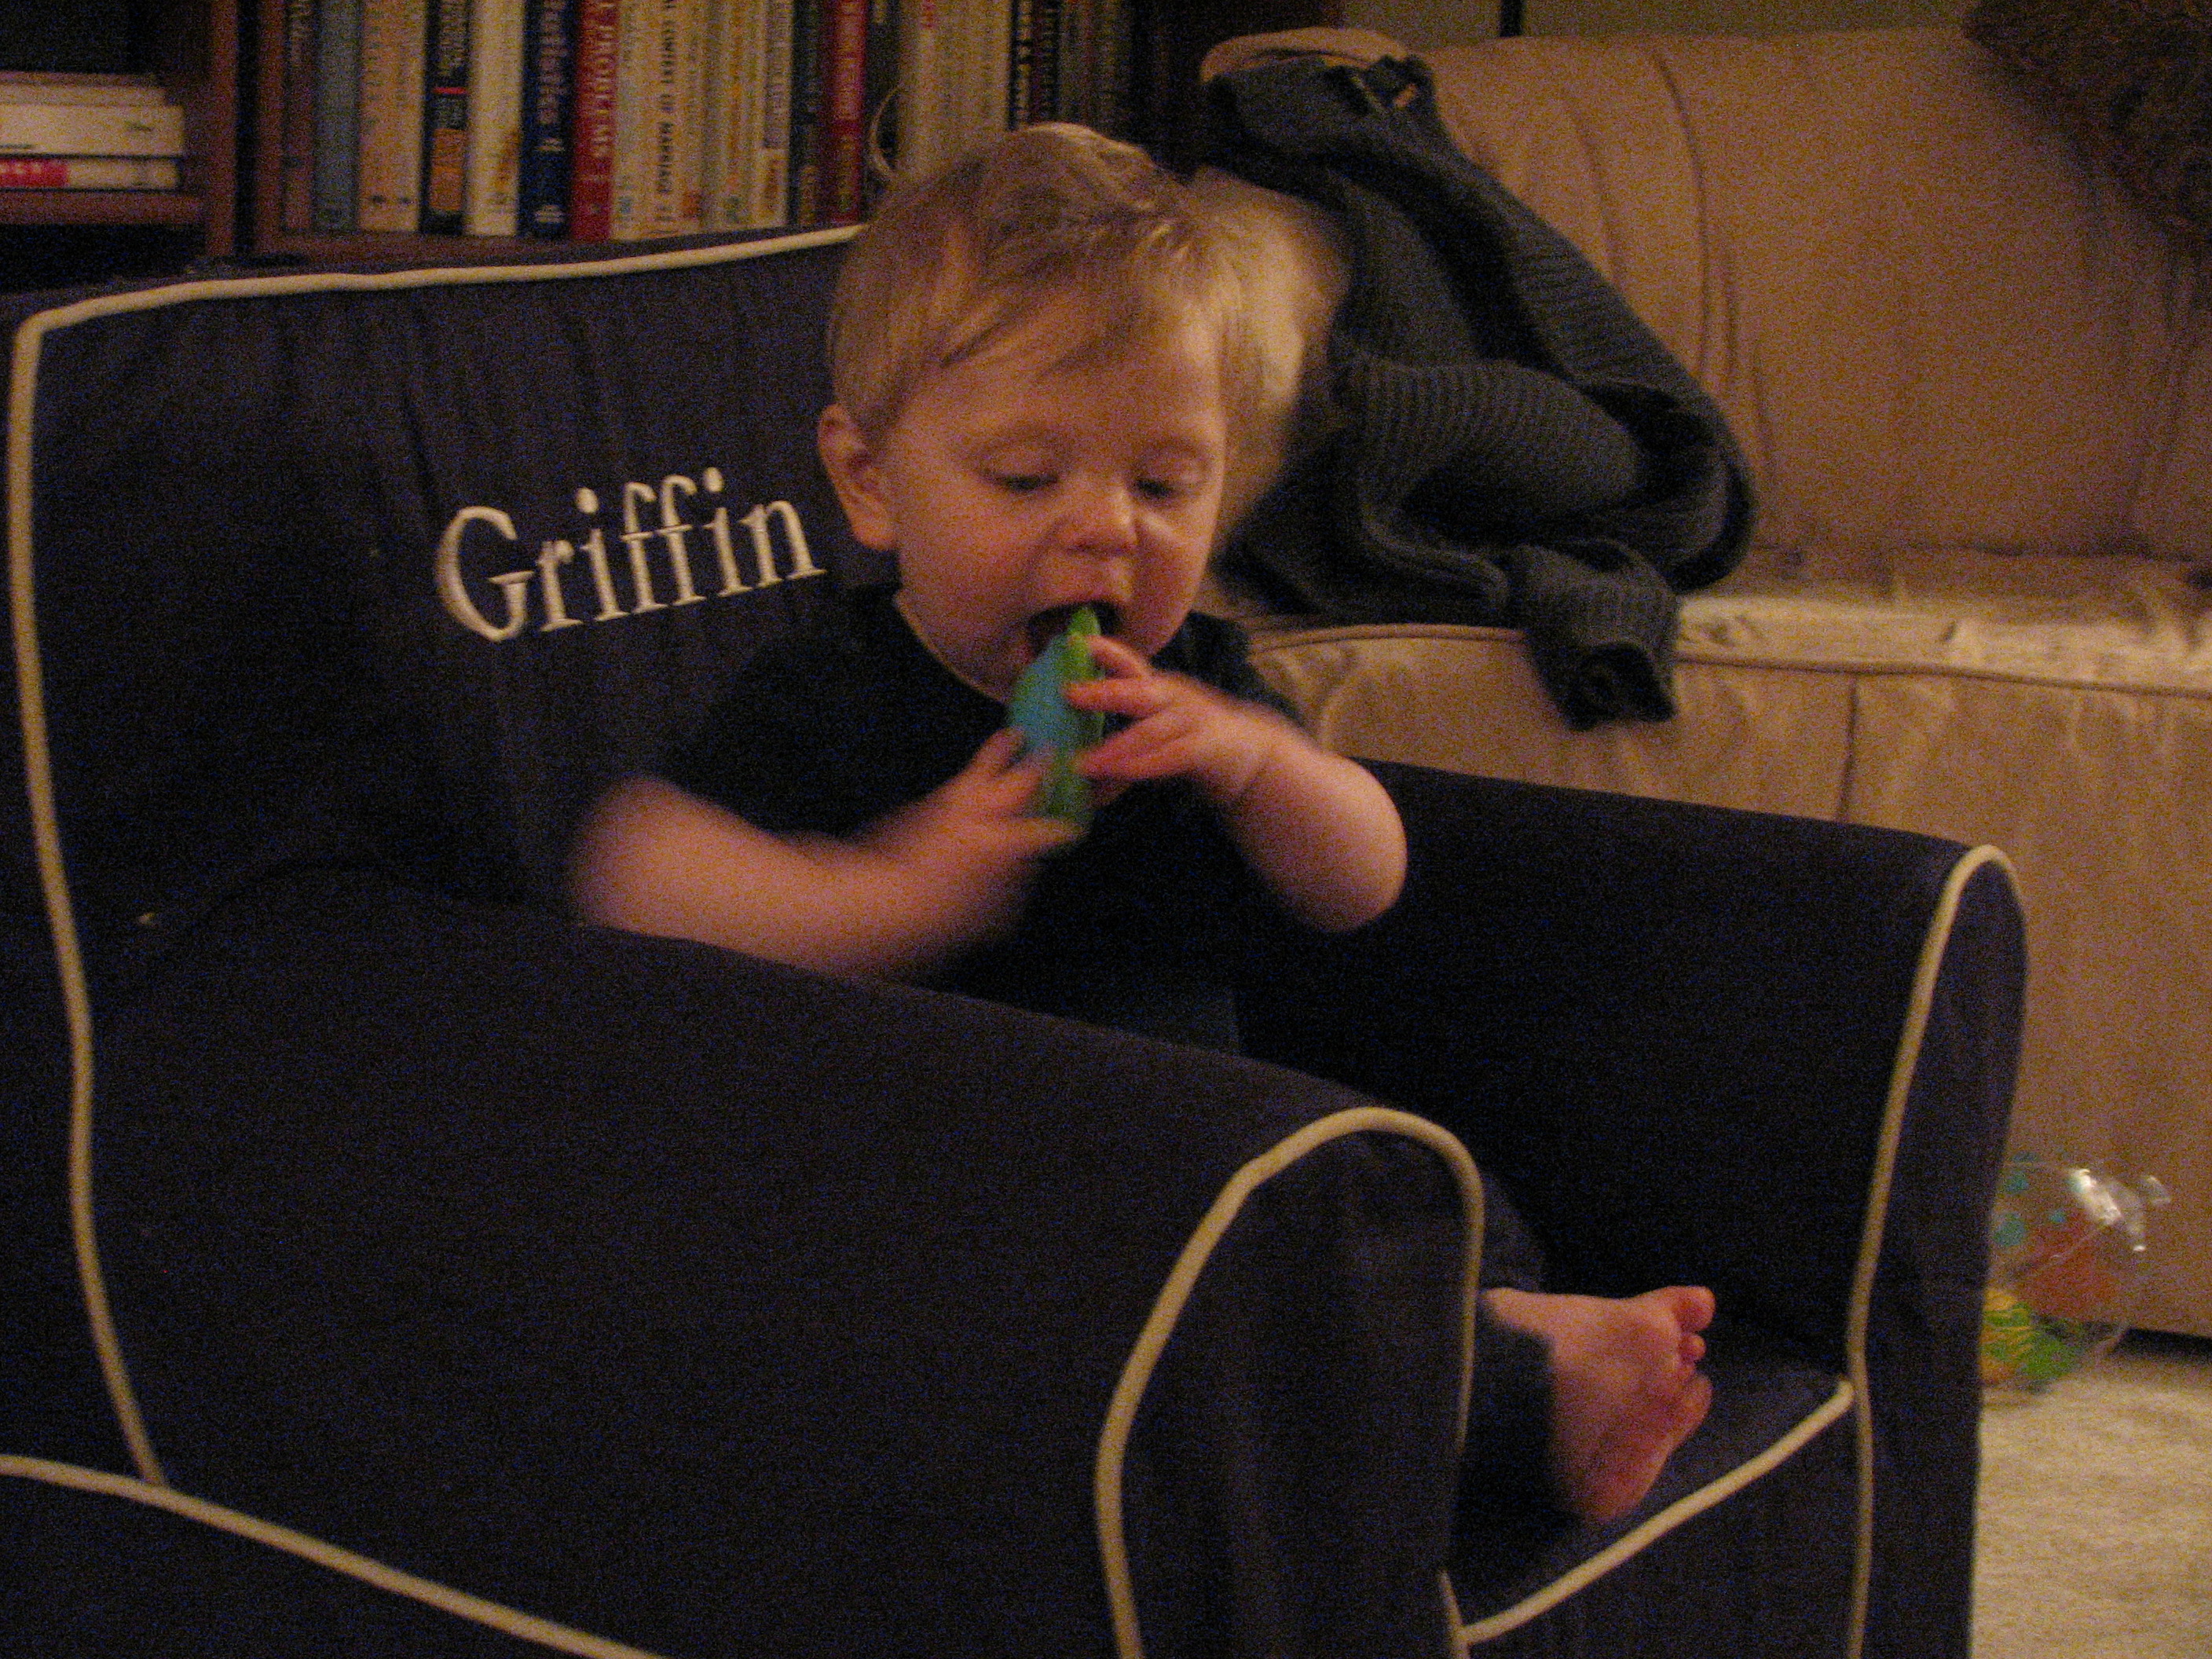 Chillin' in his chair (OK, so this only lasted about 6 seconds)